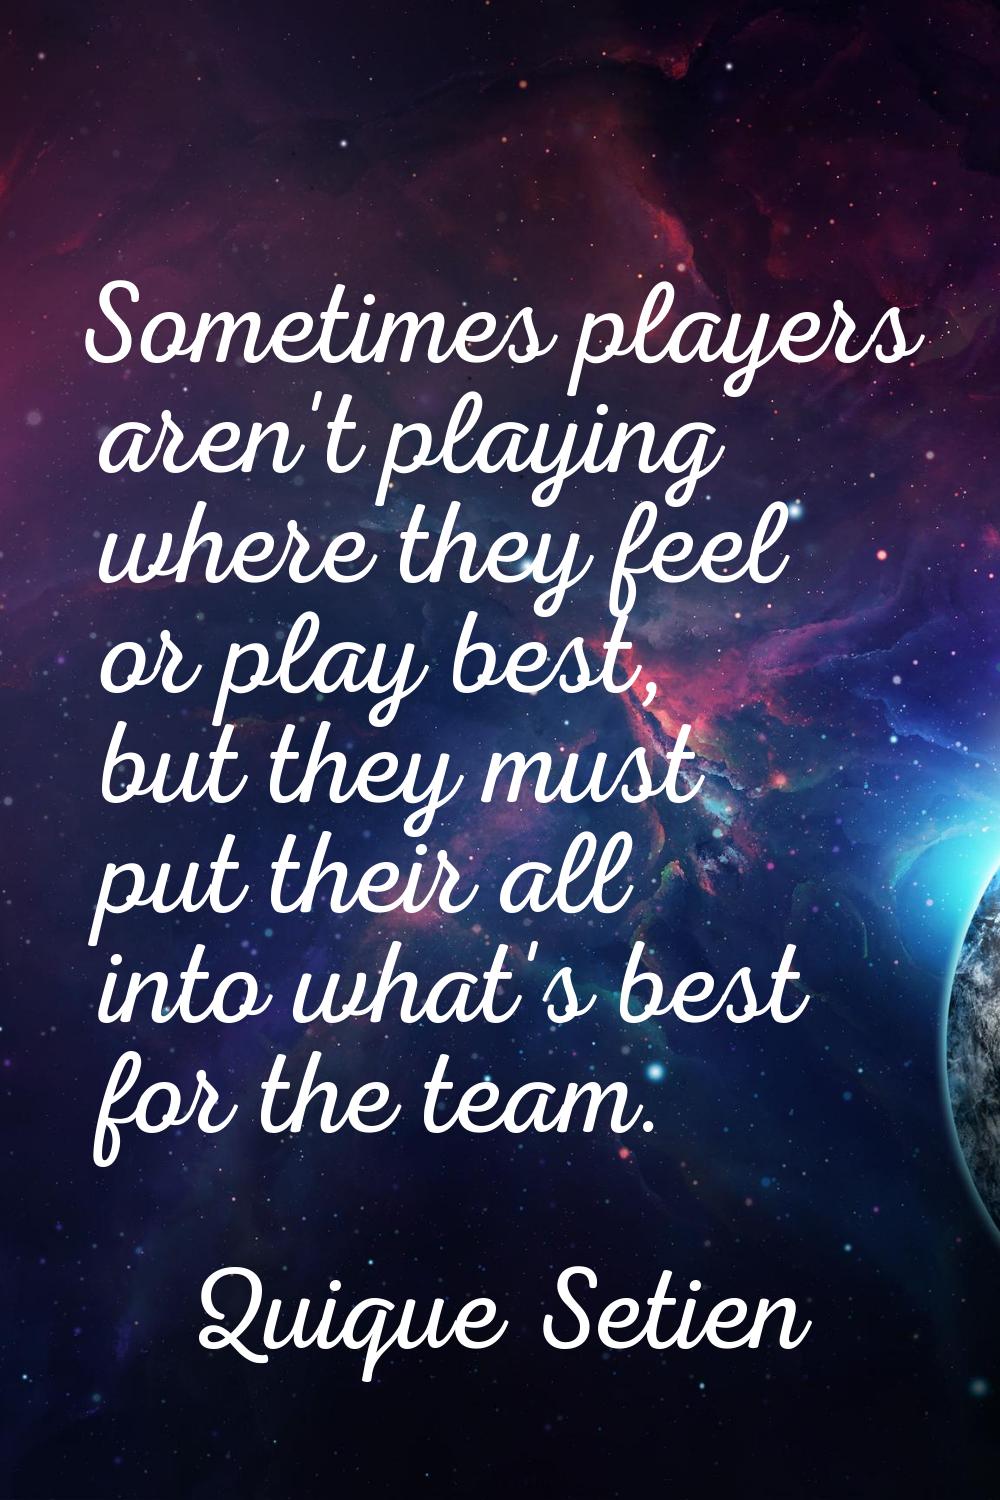 Sometimes players aren't playing where they feel or play best, but they must put their all into wha